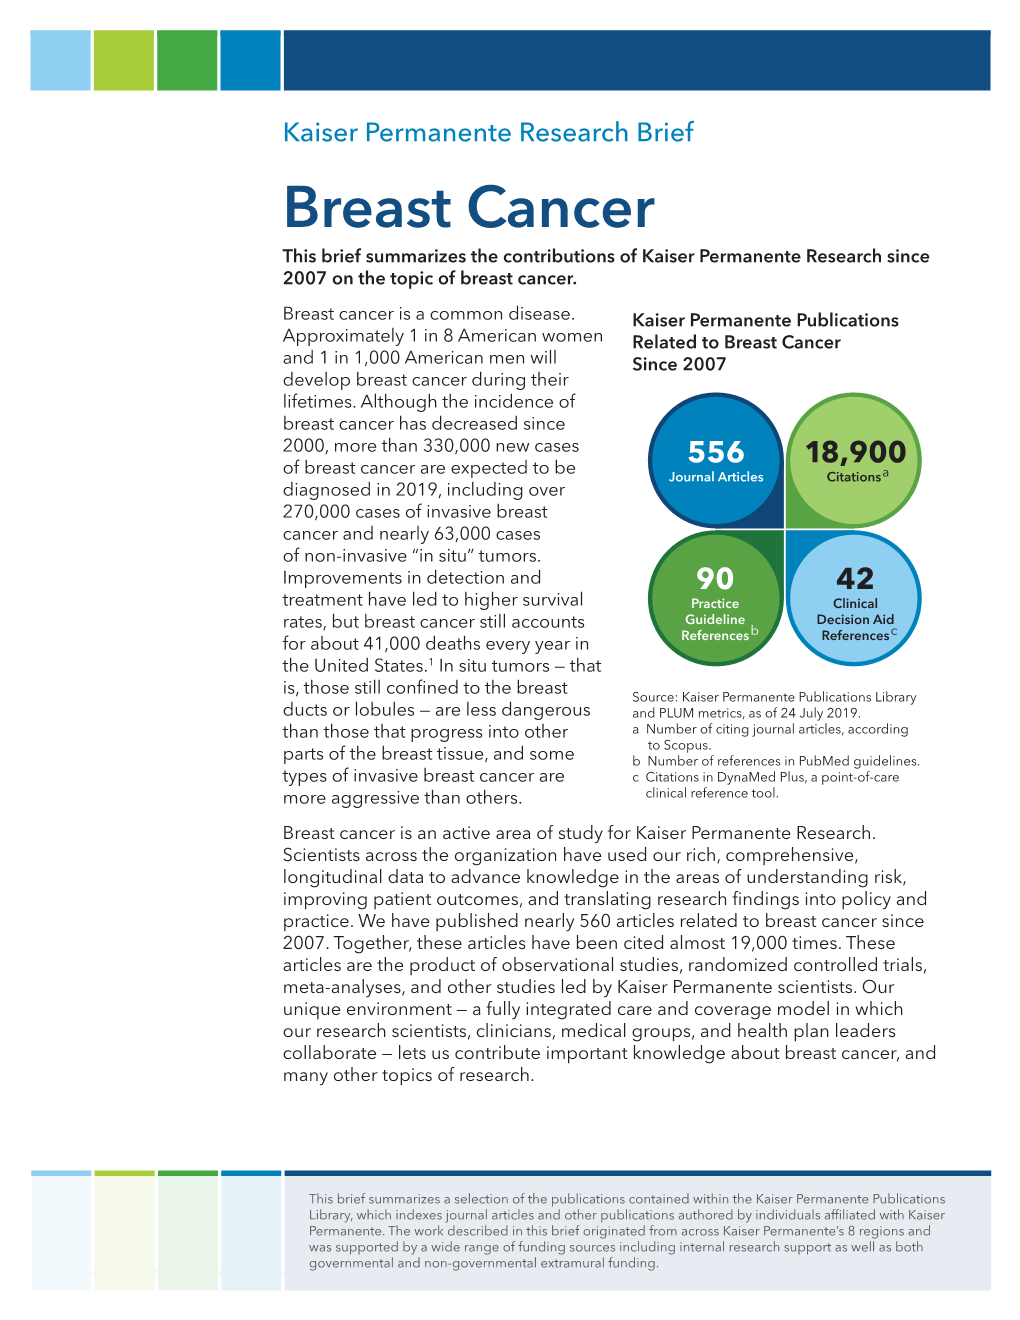 Breast Cancer This Brief Summarizes the Contributions of Kaiser Permanente Research Since 2007 on the Topic of Breast Cancer